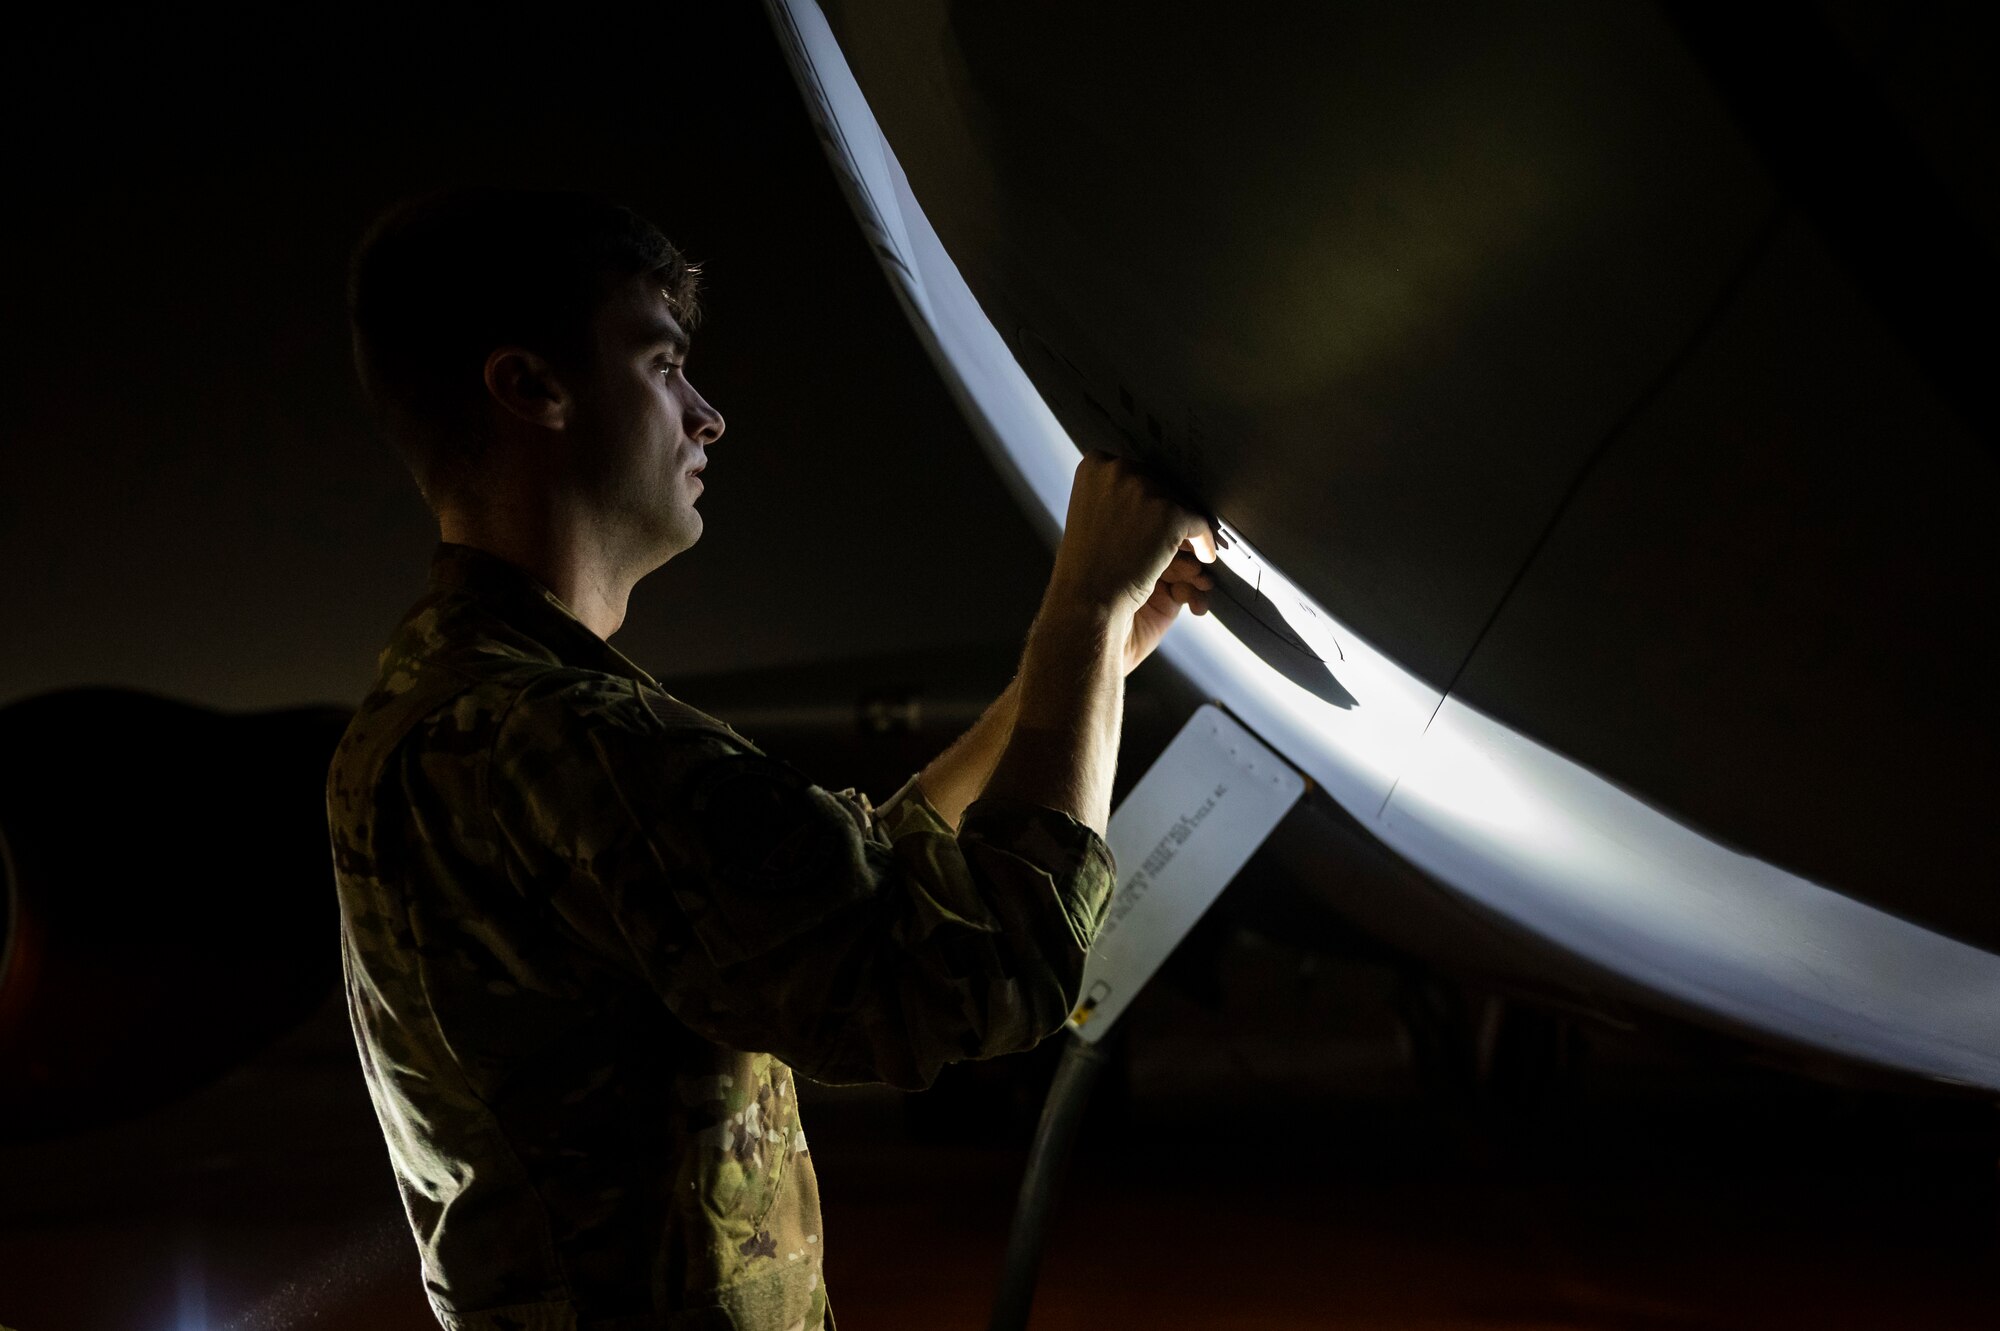 Airman working on an aircraft at night